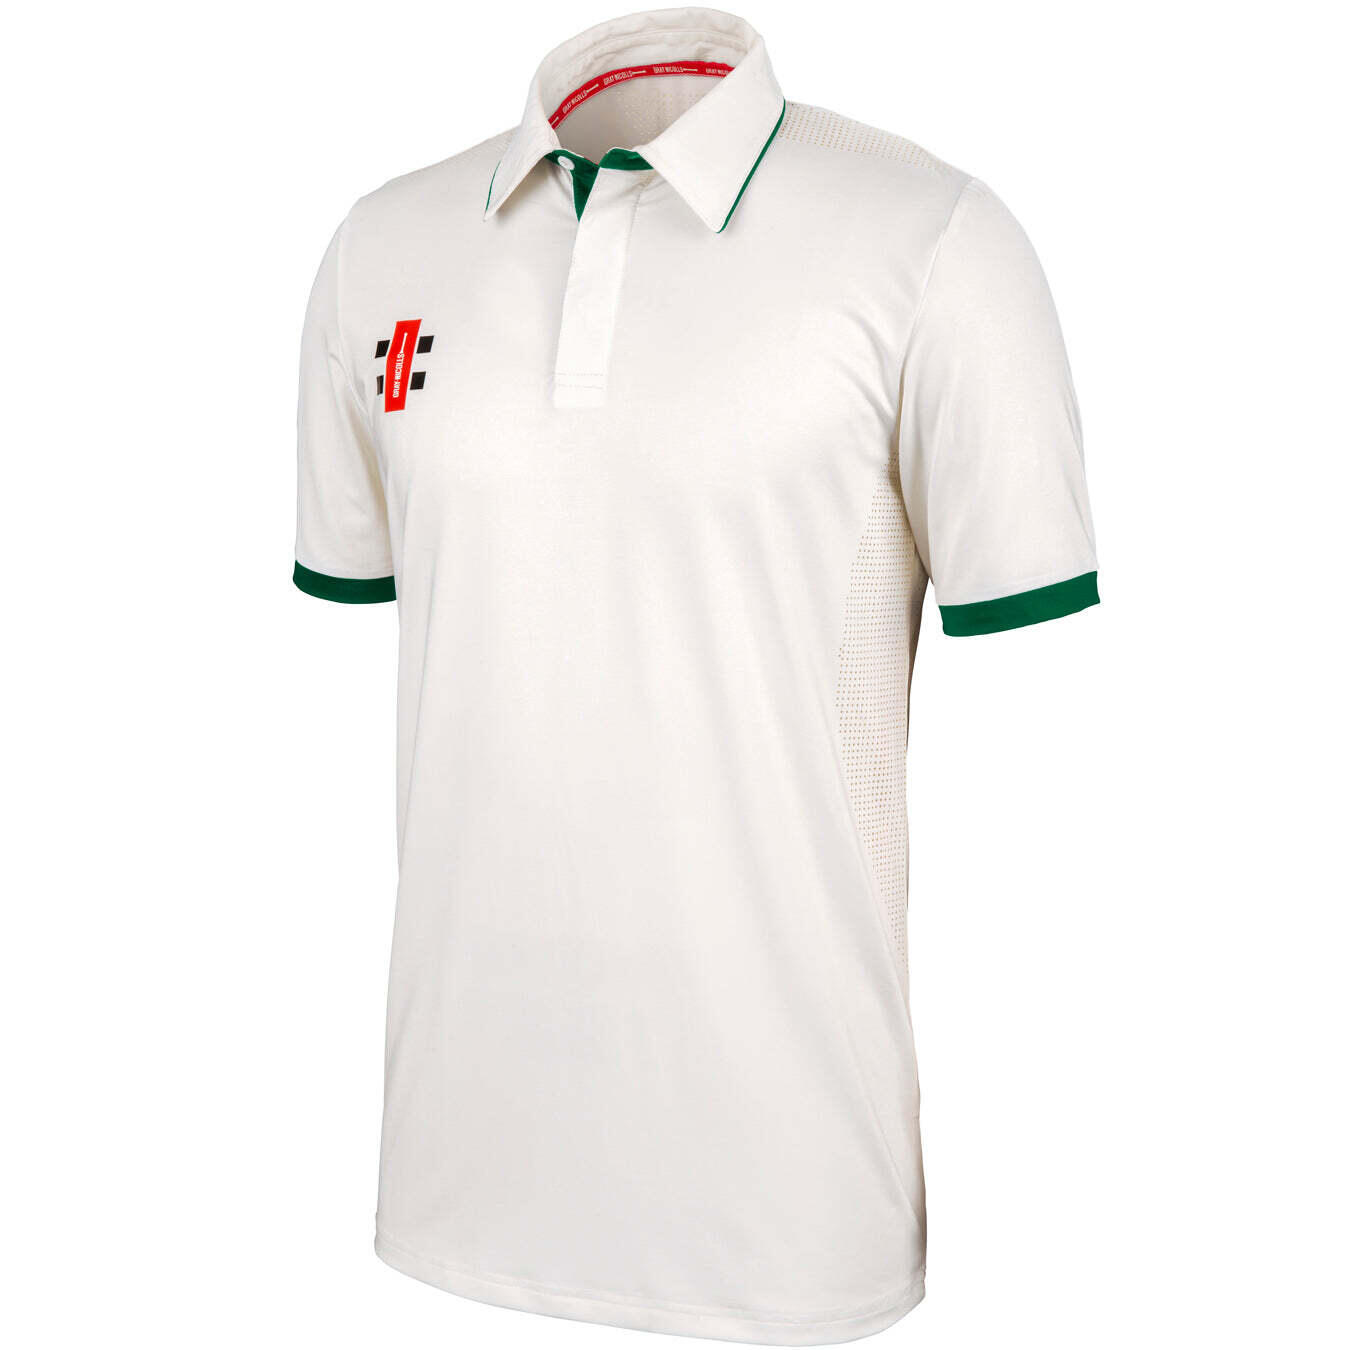 Pro Performance S/S Playing Shirt,Ivory/Green,Adult 3/3